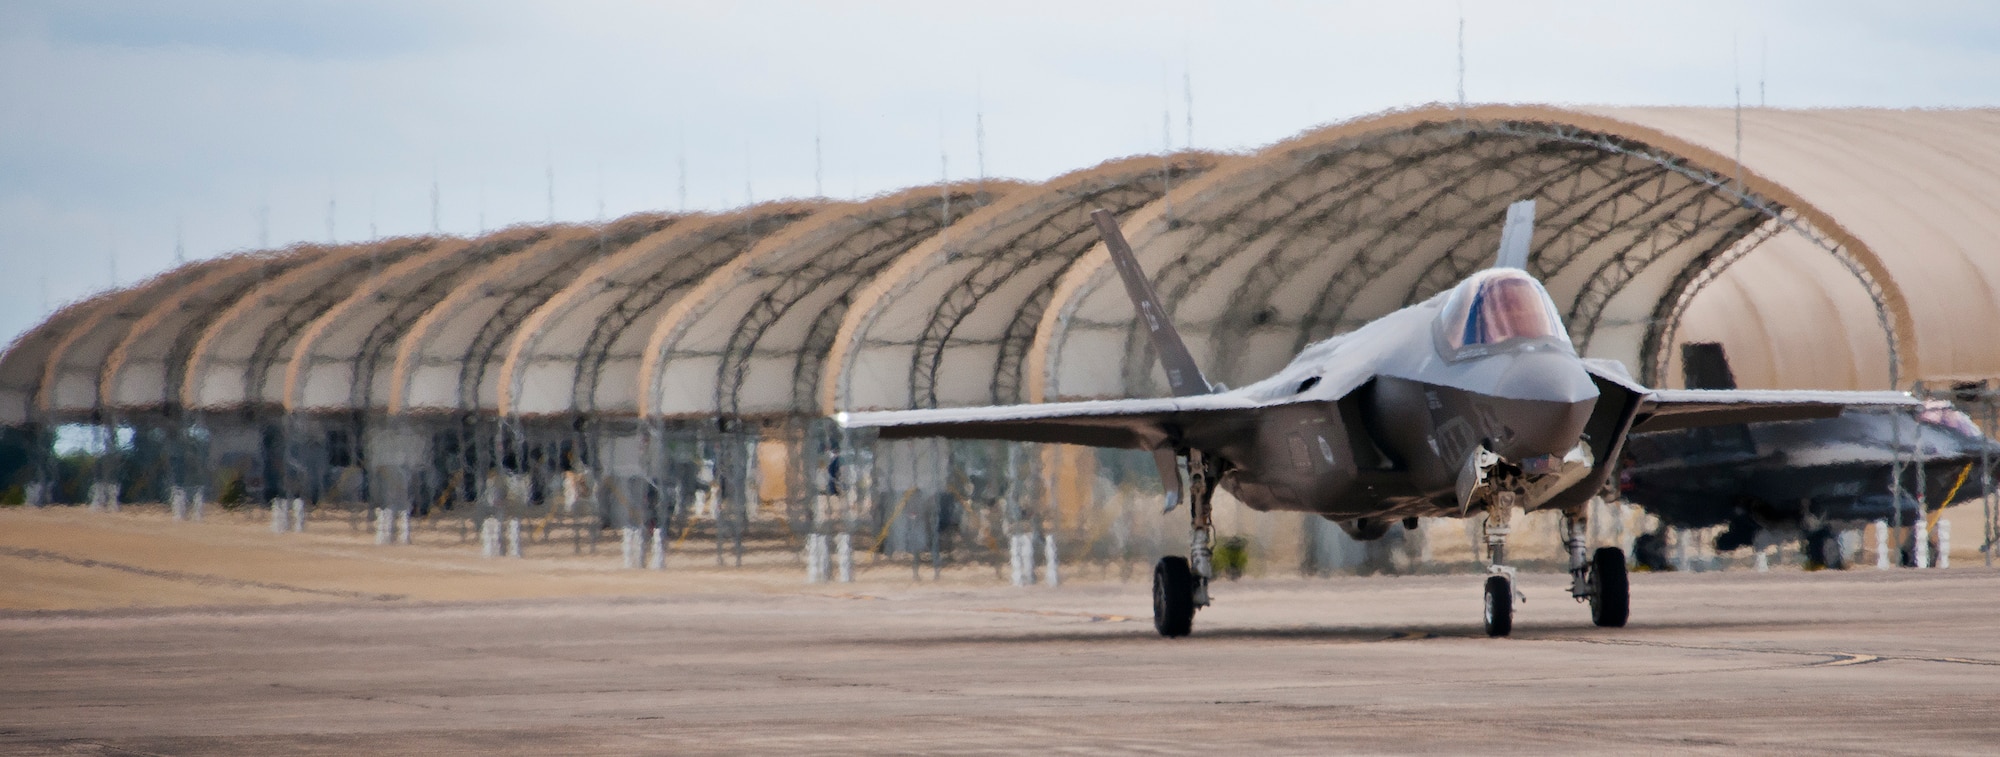 An F-35A Lightning II taxis down the 33rd Fighter Wing flightline after a sortie at Eglin Air Force Base, Fla.  The Air Force F-35s make of the majority of the joint strike fighters located on base.  (U.S. Air Force photo/Samuel King Jr.)